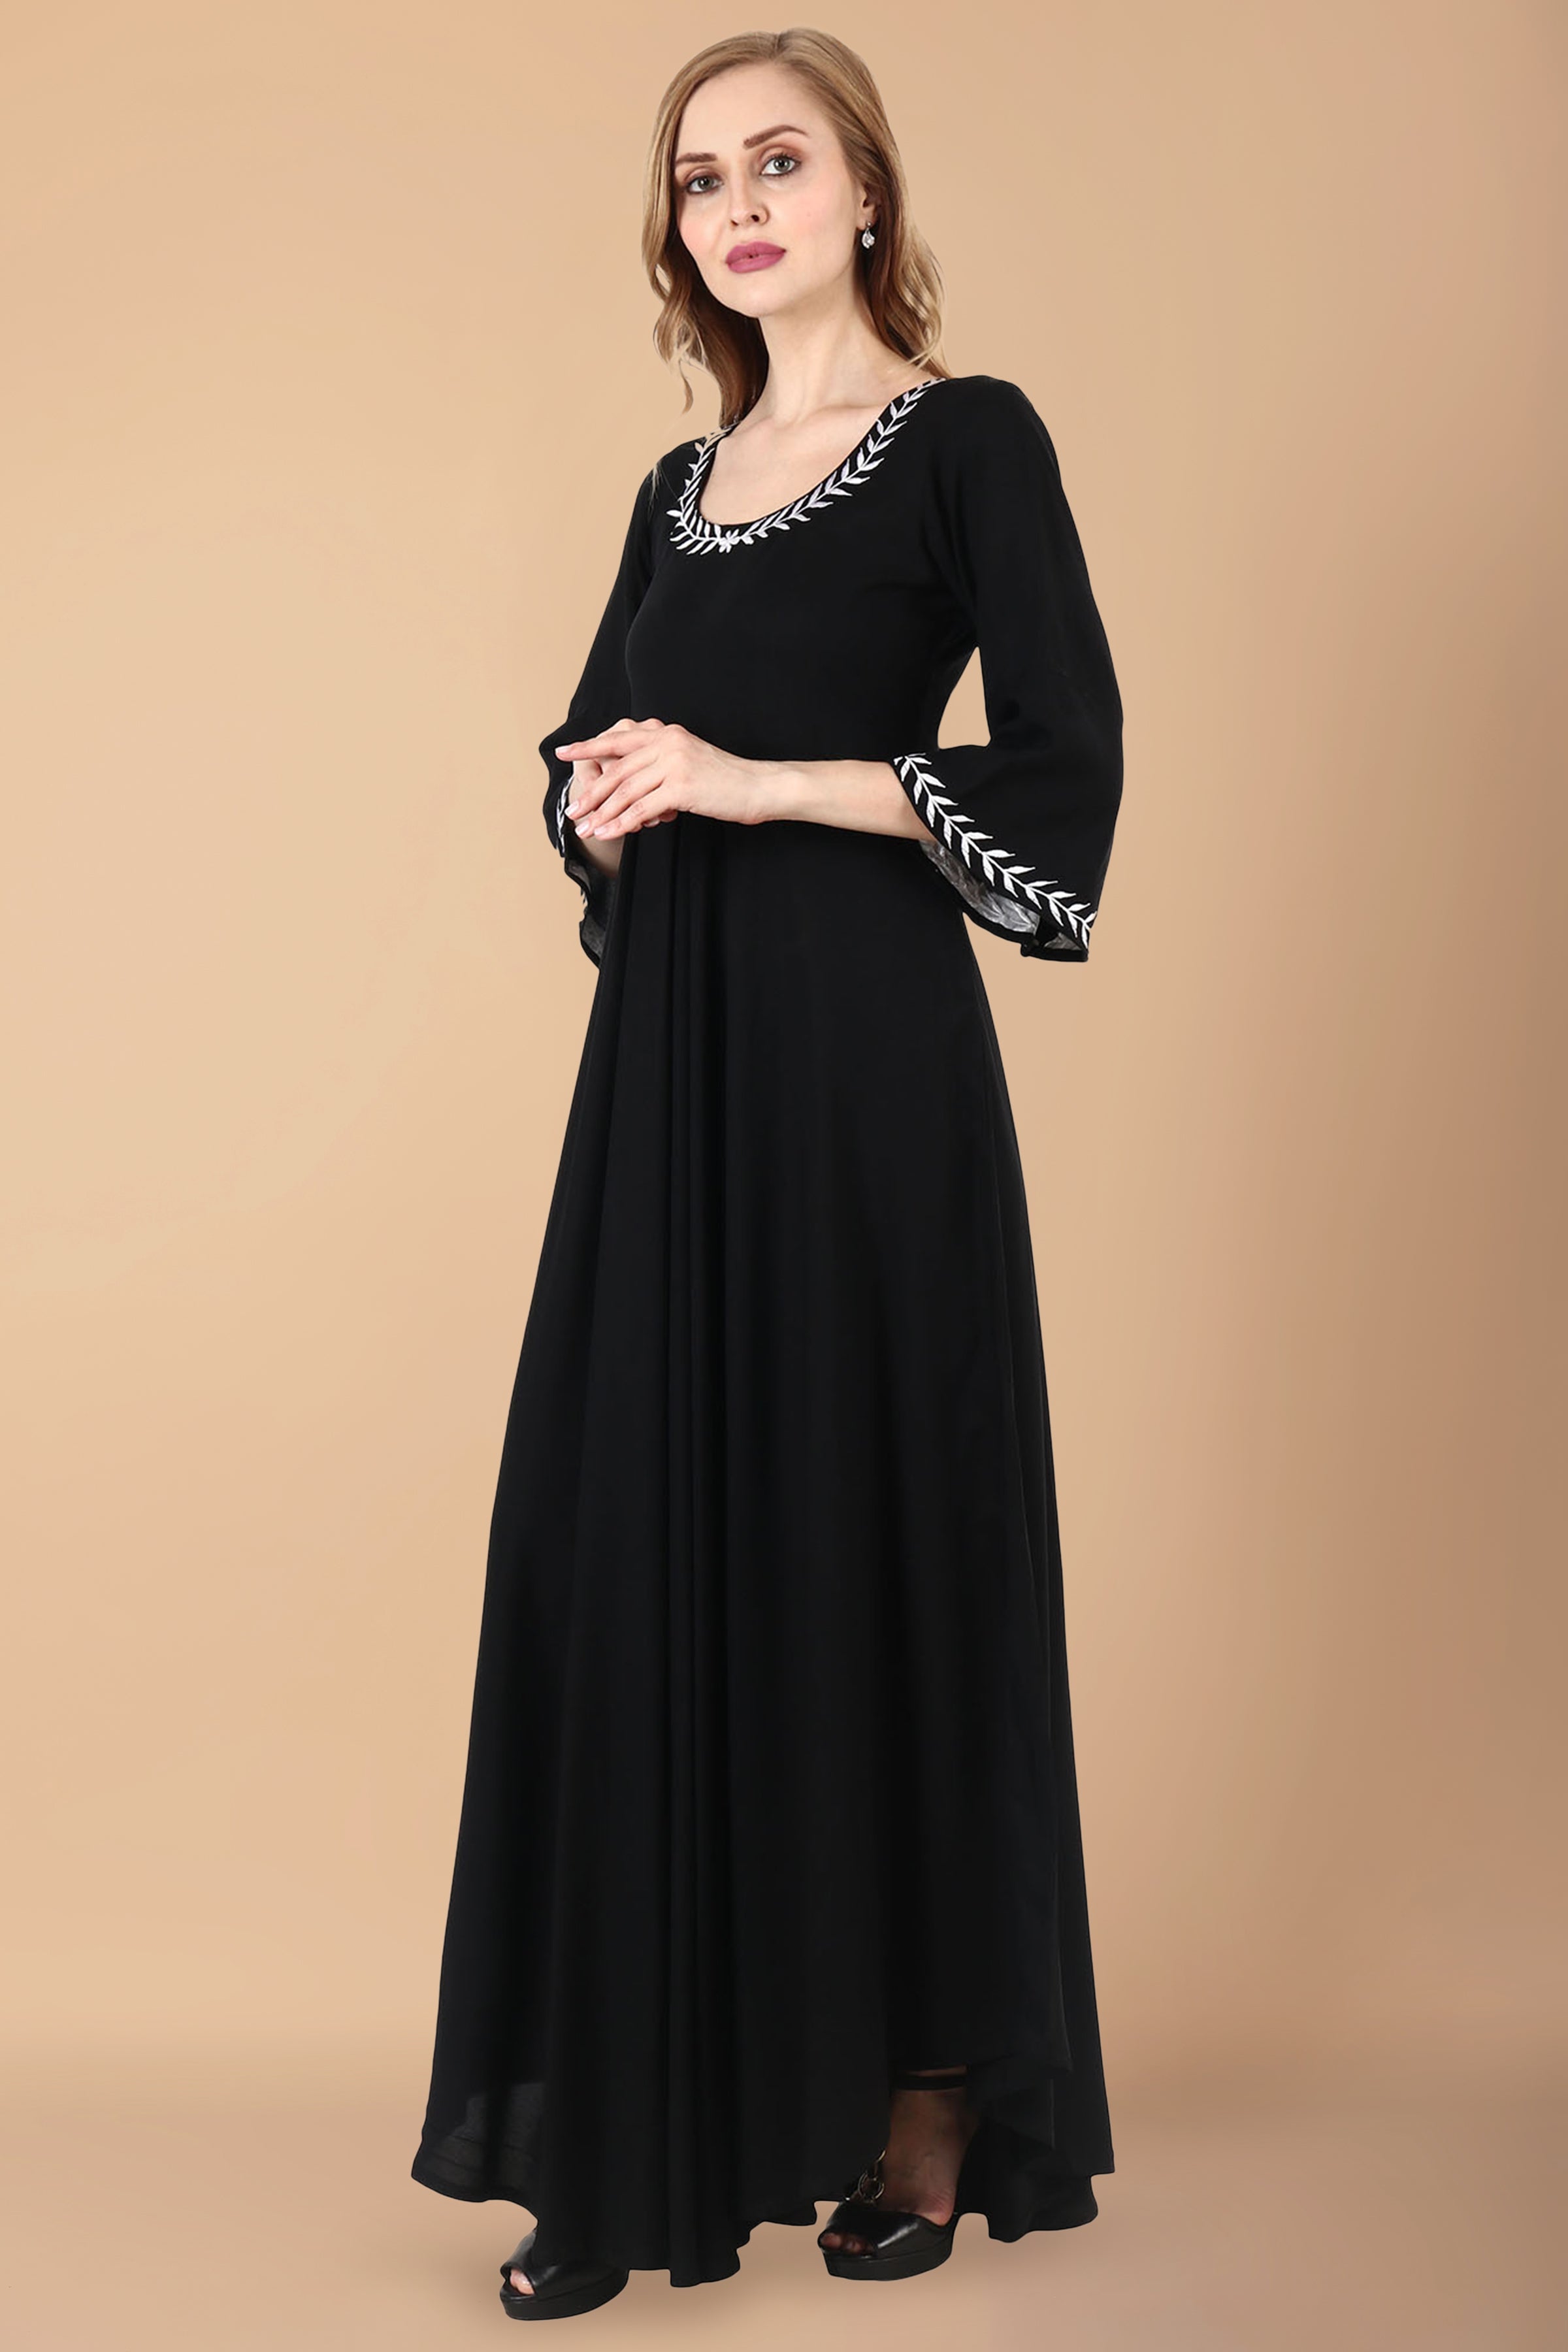 Ever-Pretty Womens Short Sleeve A-line V-Neck Chiffon Maternity Dresses for  Party Black US4 at Amazon Women's Clothing store